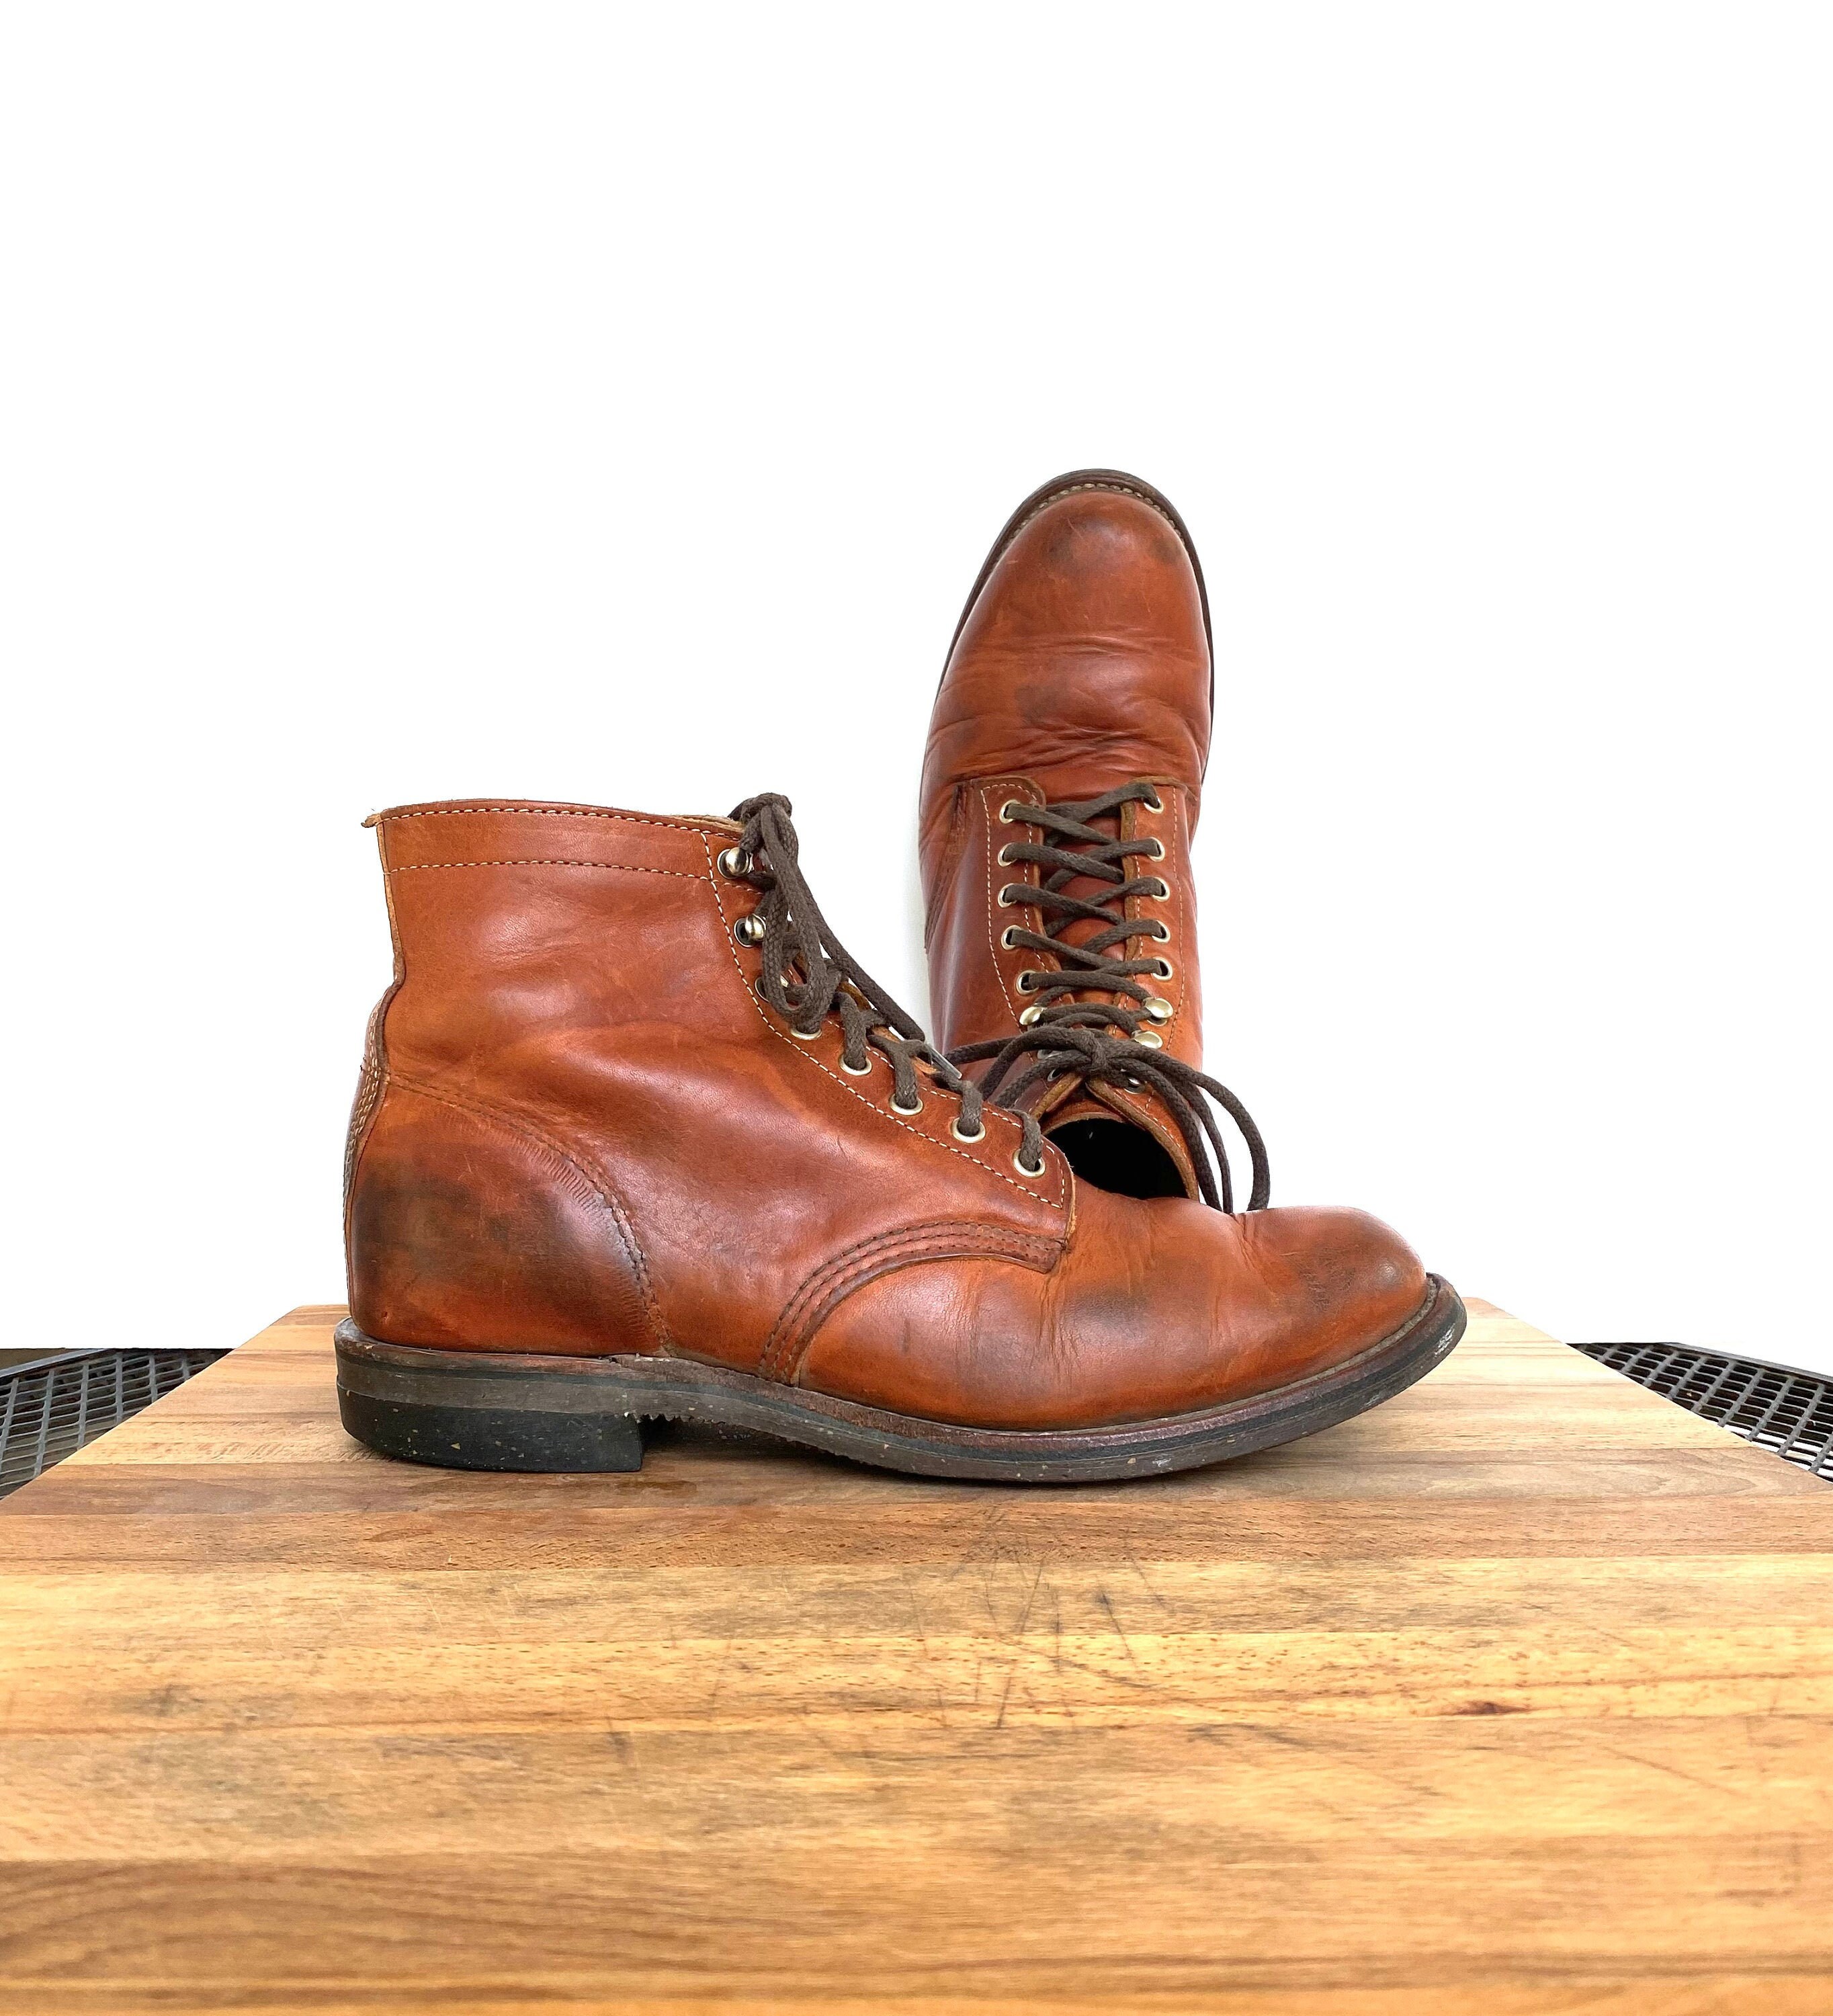 Chippewa Snake Boots for sale | Only 2 left at -70%